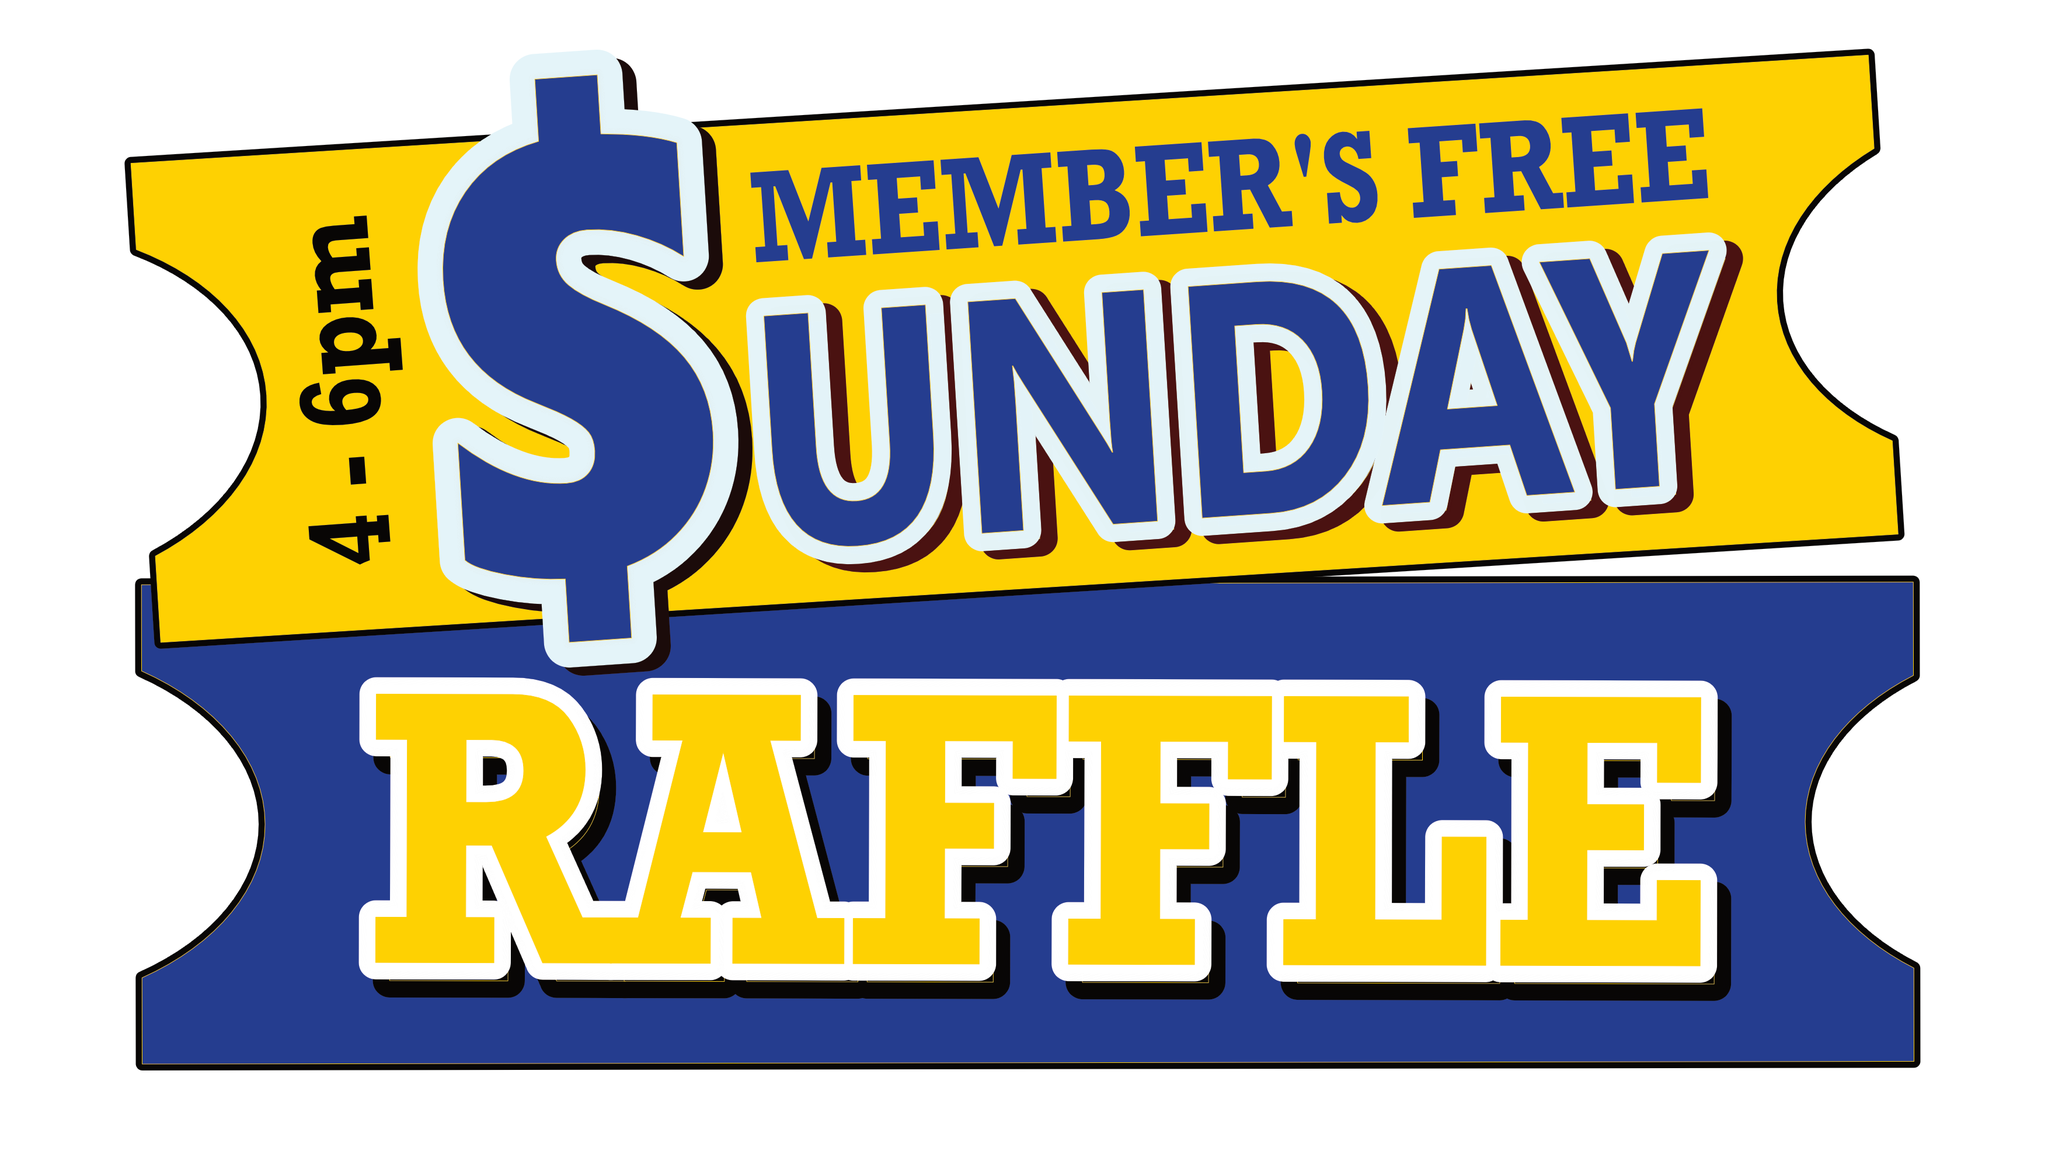 $UNDAY FREE MEMBER’S RAFFLE – Starting April 3rd! Every Sunday!